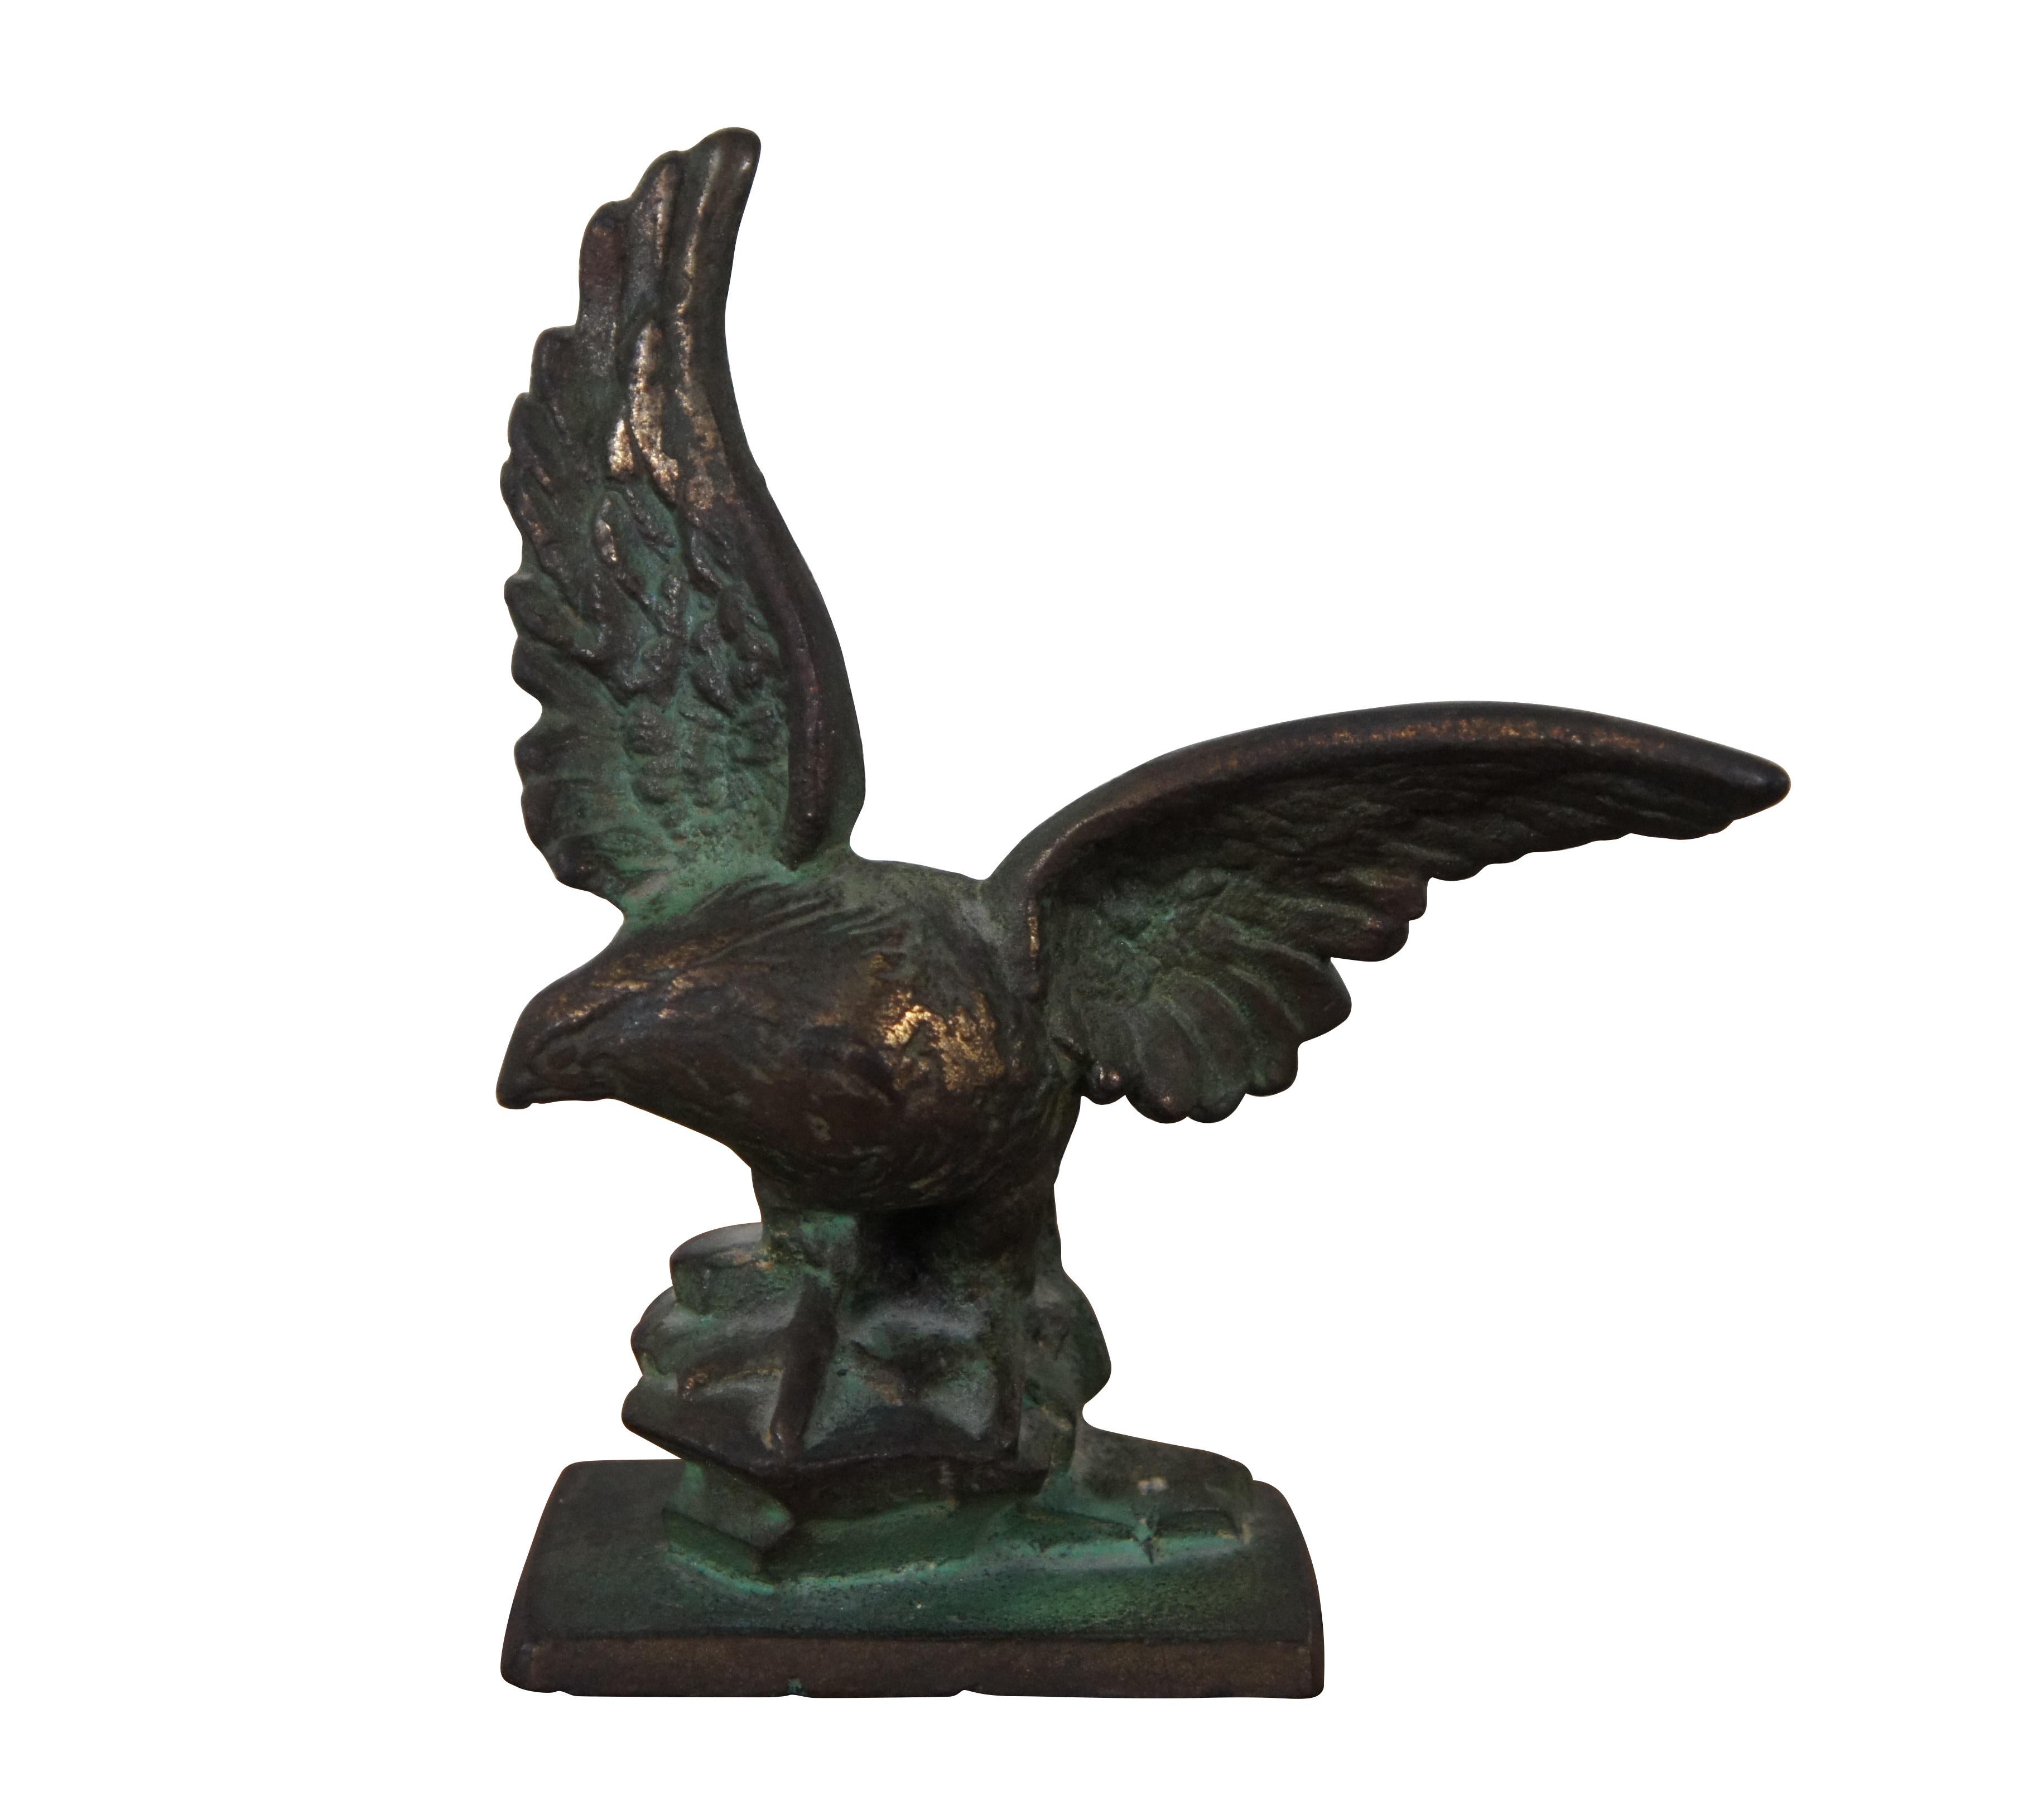 Pair of antique early 20th century cast bronze book ends in the shape of eagles with wings outstretched, perched on a pedestal of rocks.

Dimensions:
5.5